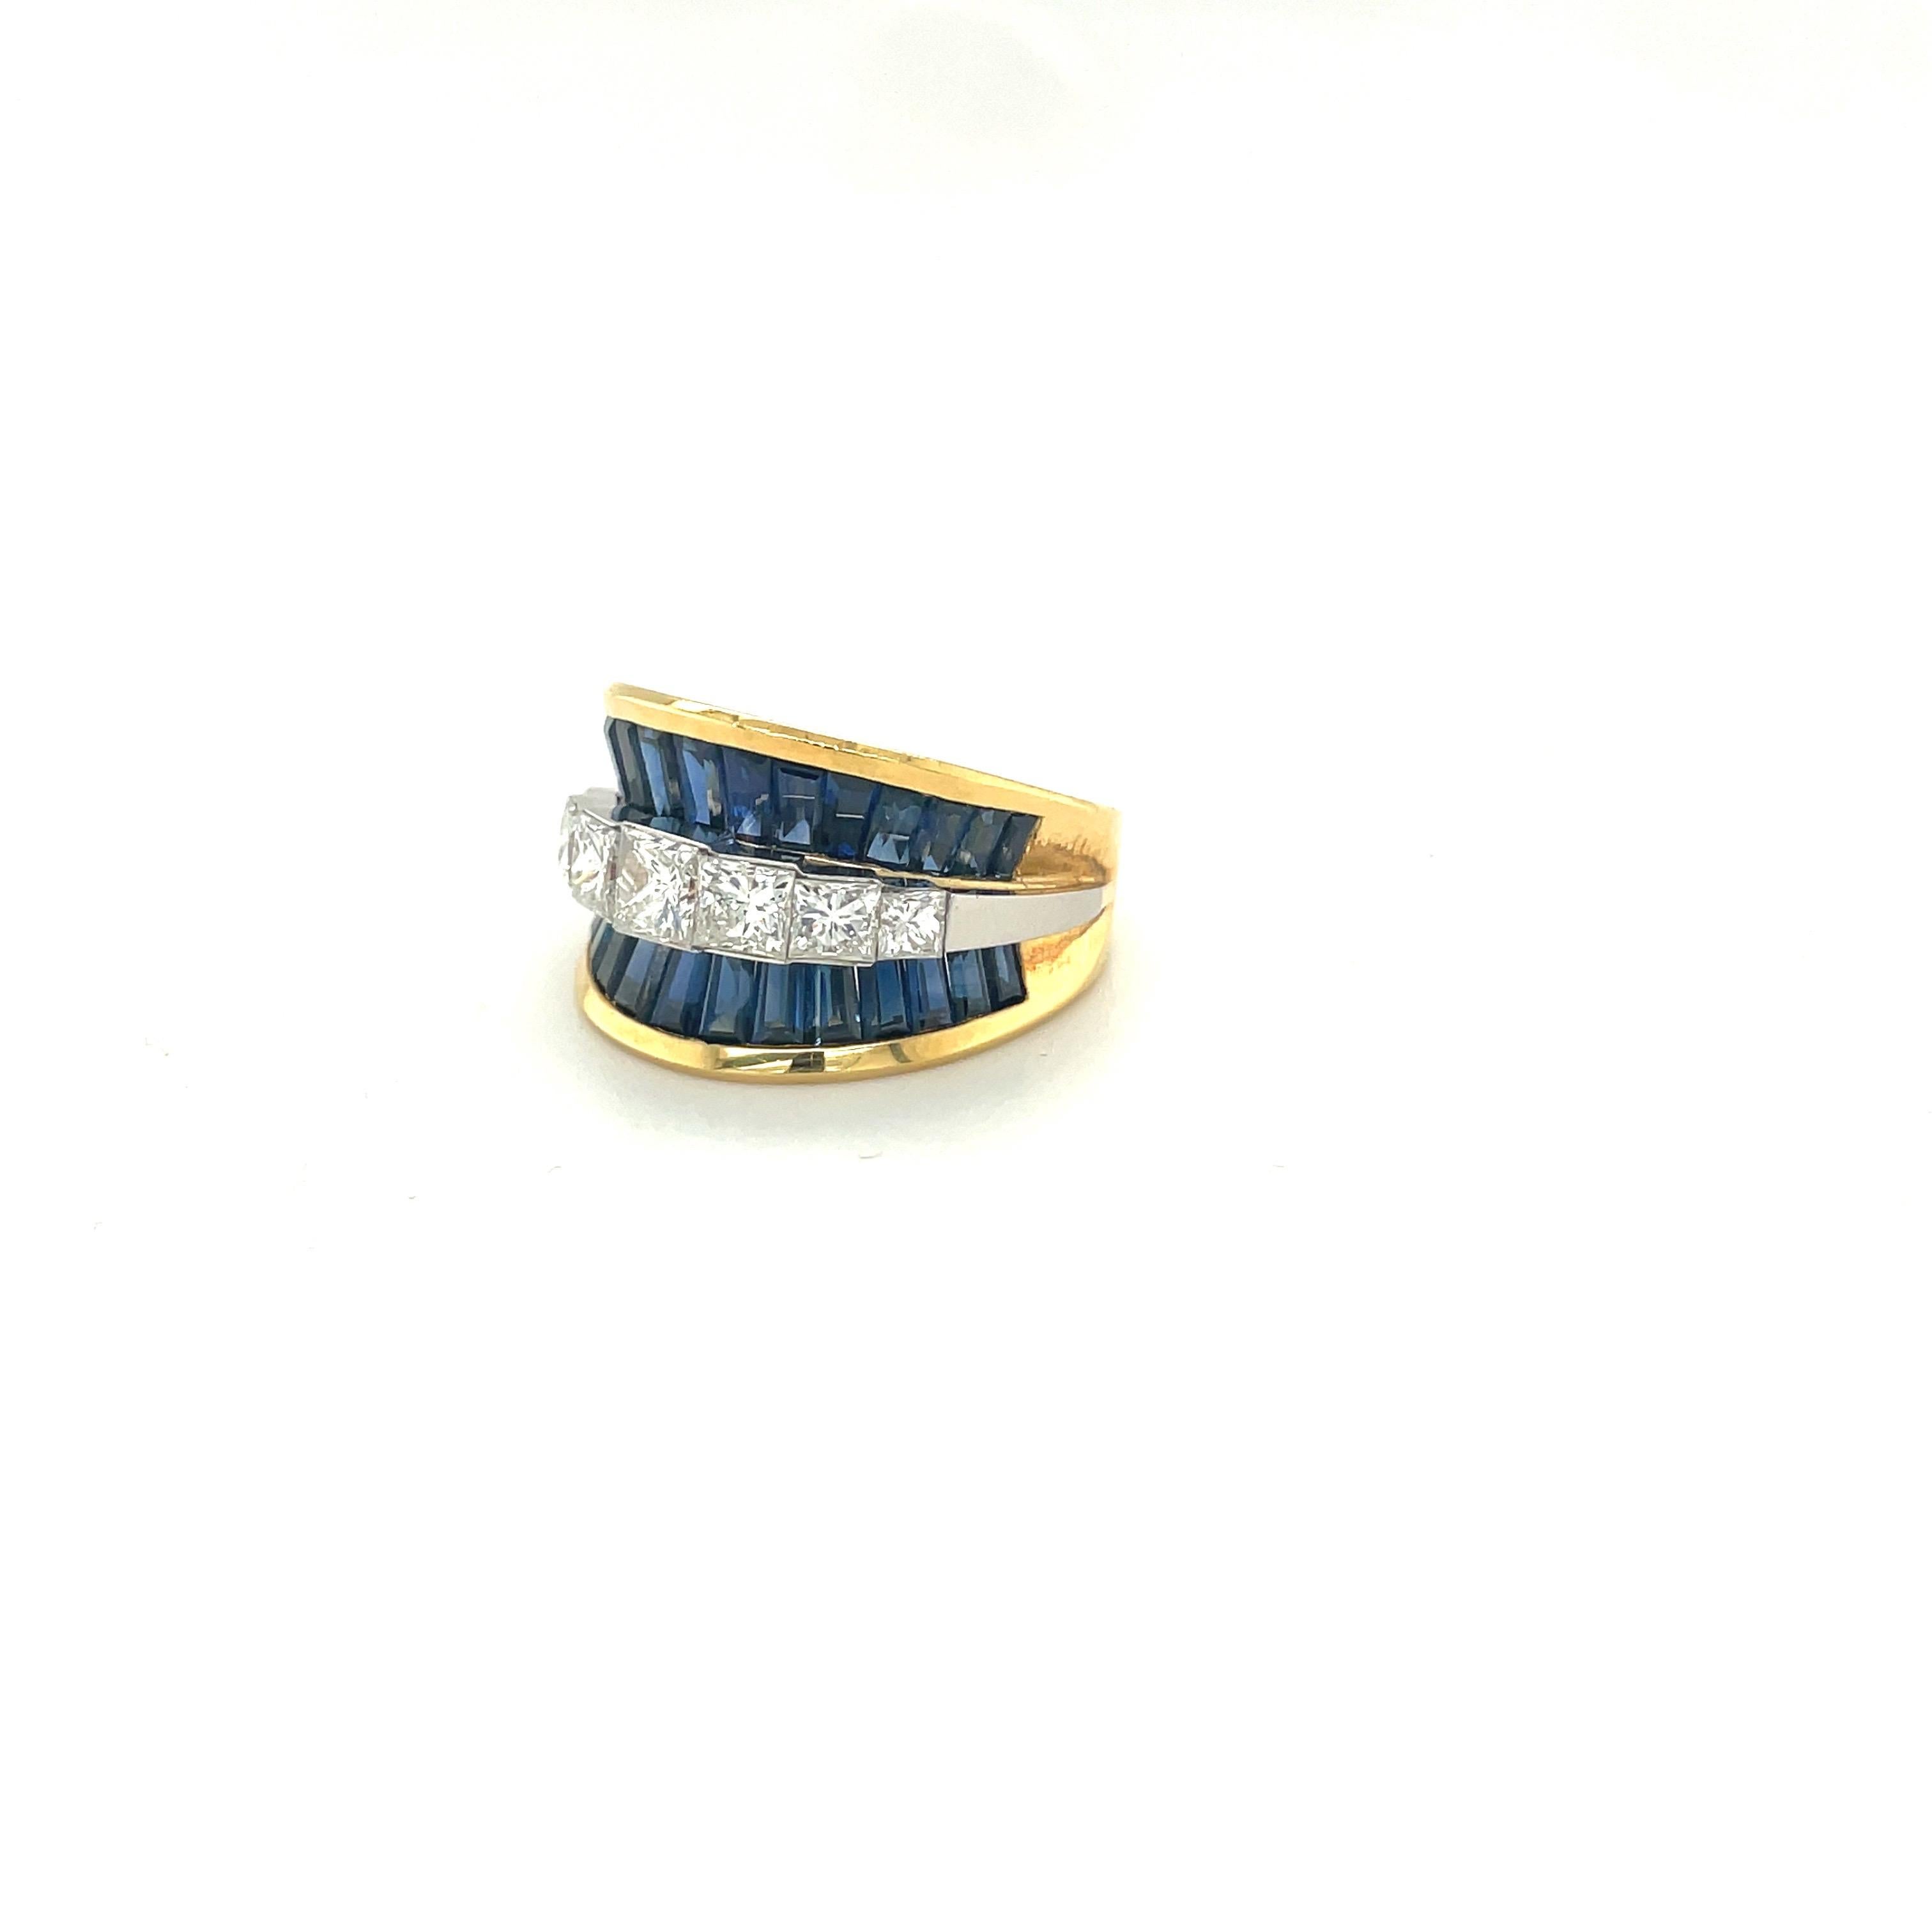 The brilliant cut princess cut diamonds are flanked by 2 rows of baguette cut sapphires, set in 18 karat gold. This concave ring has a slight taper to fit comfortably to any finger.  The combination of the princess cut diamonds and sapphire